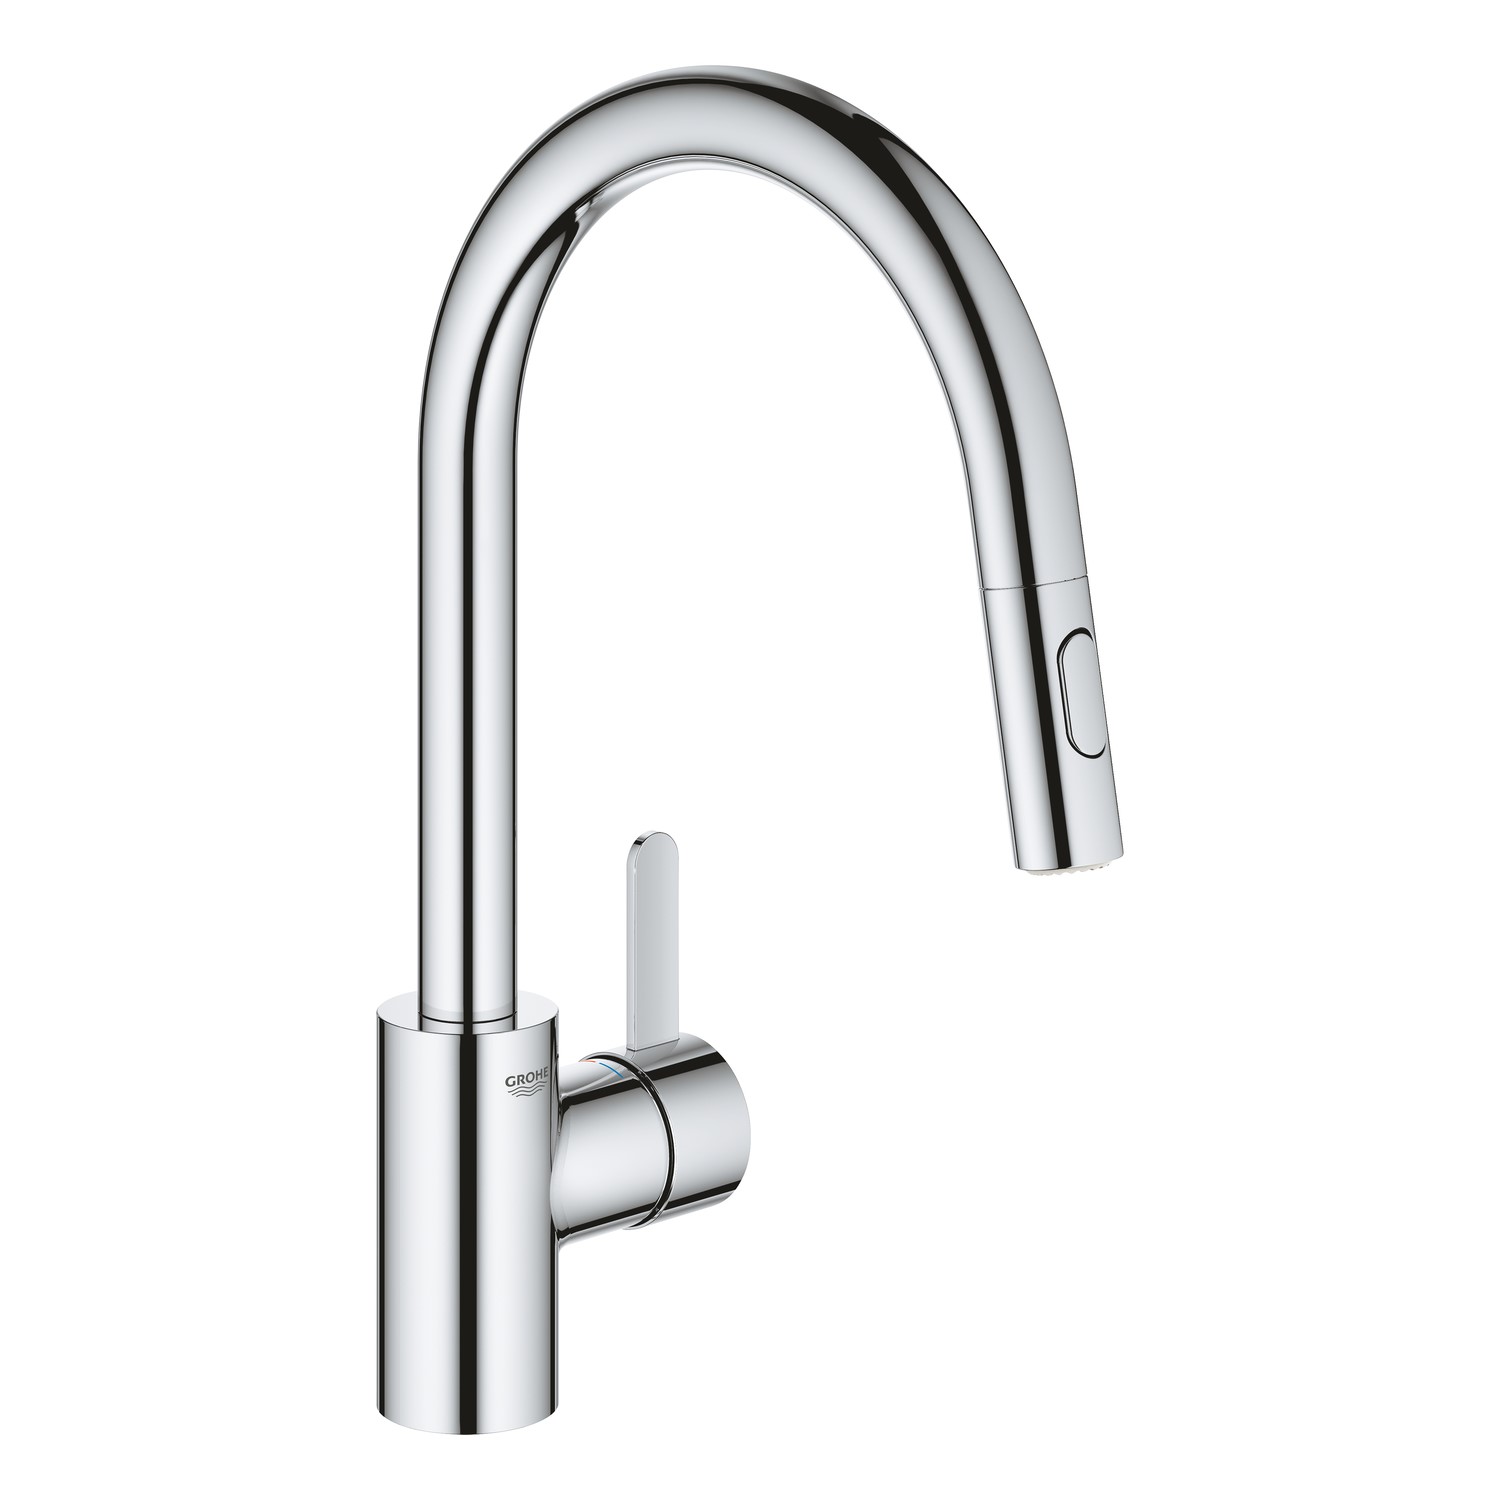 Grohe Chrome High Spout Single Lever Pull Out Spray Kitchen Mixer Tap - Eurosmart